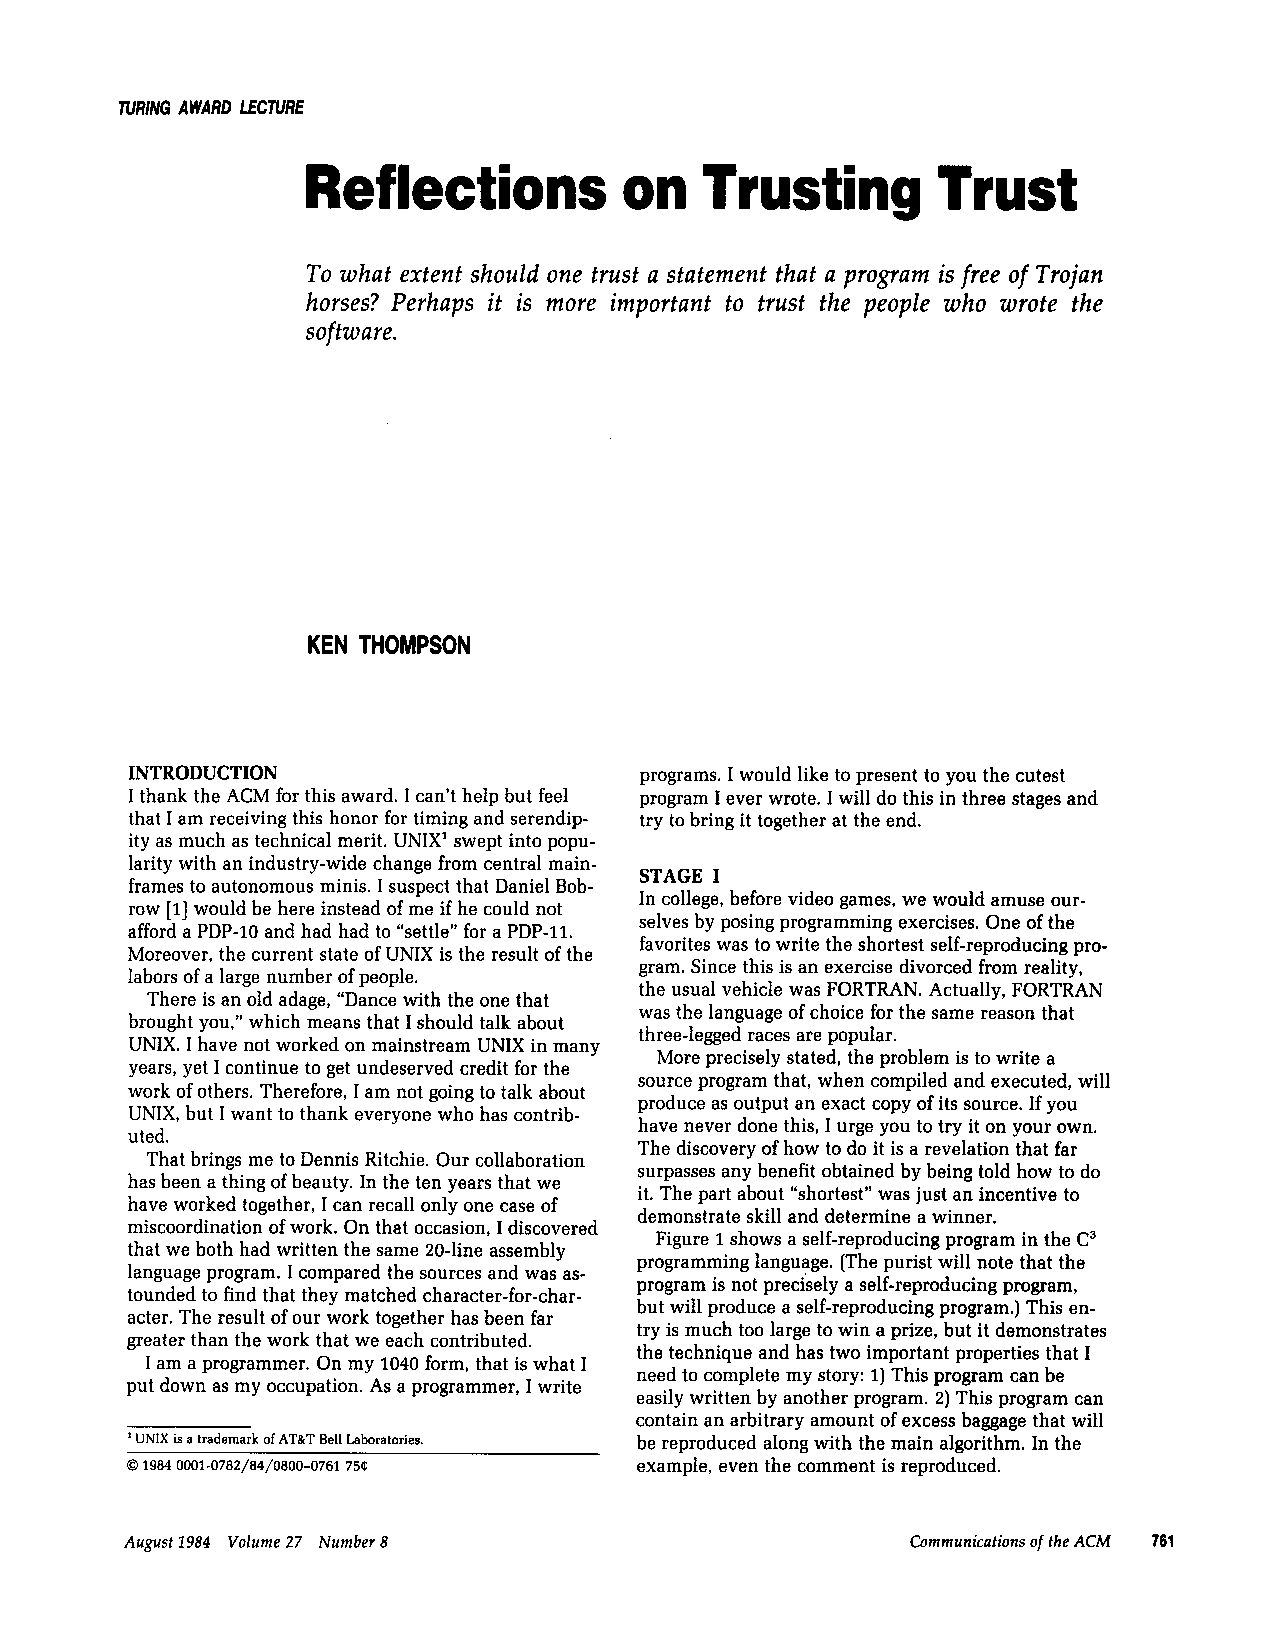 Reflections on Trusting Trust